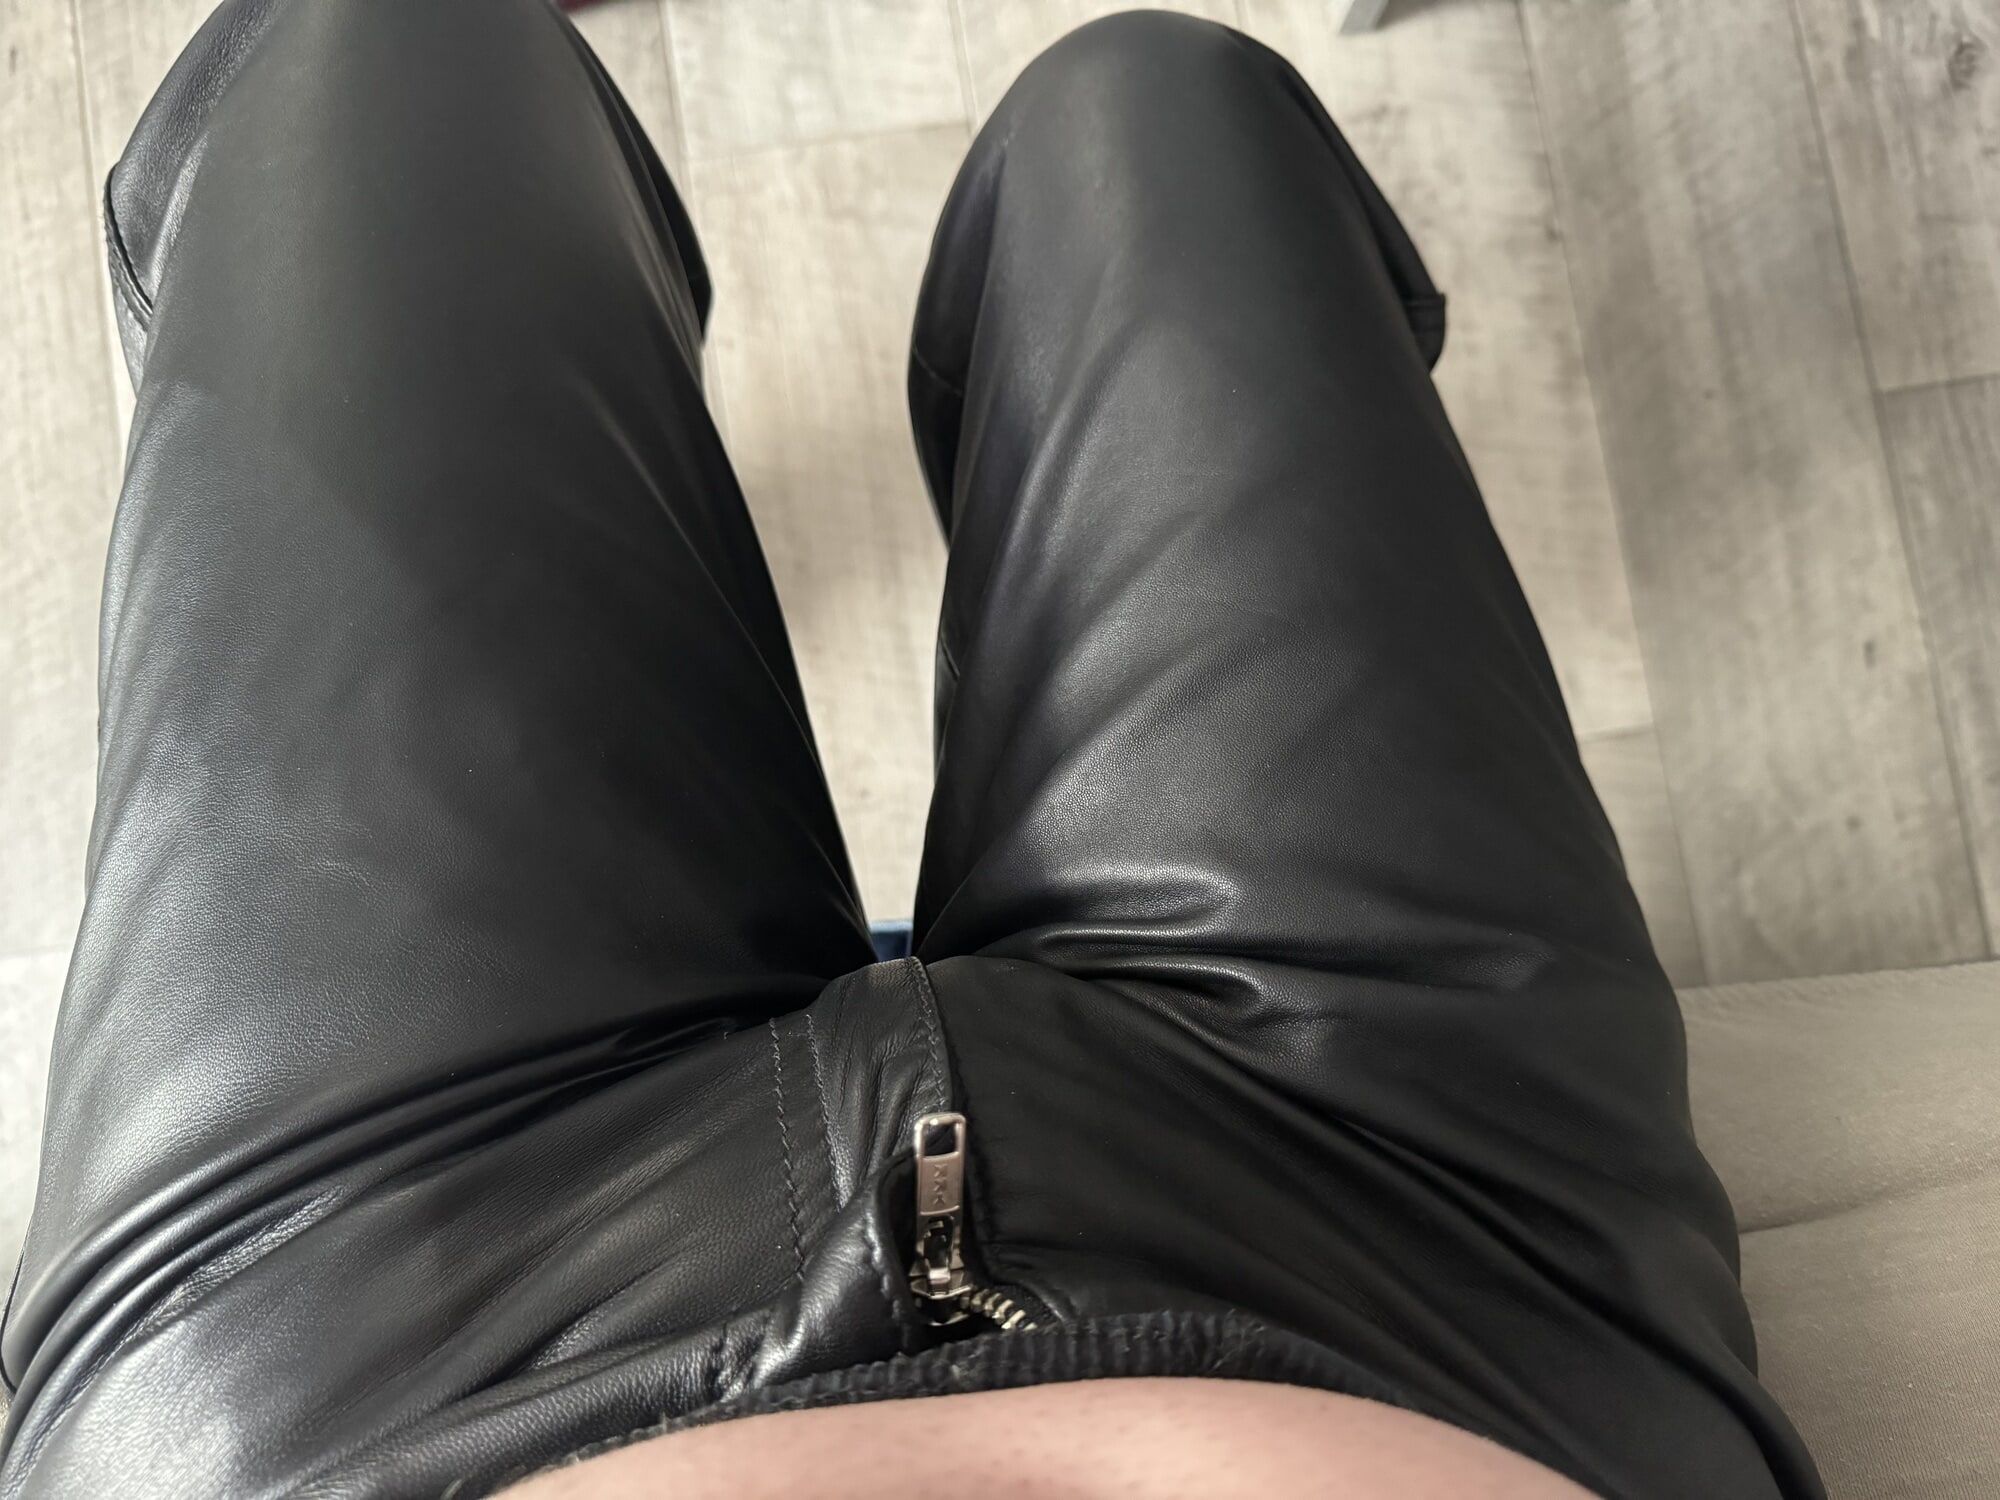 In Leather #2